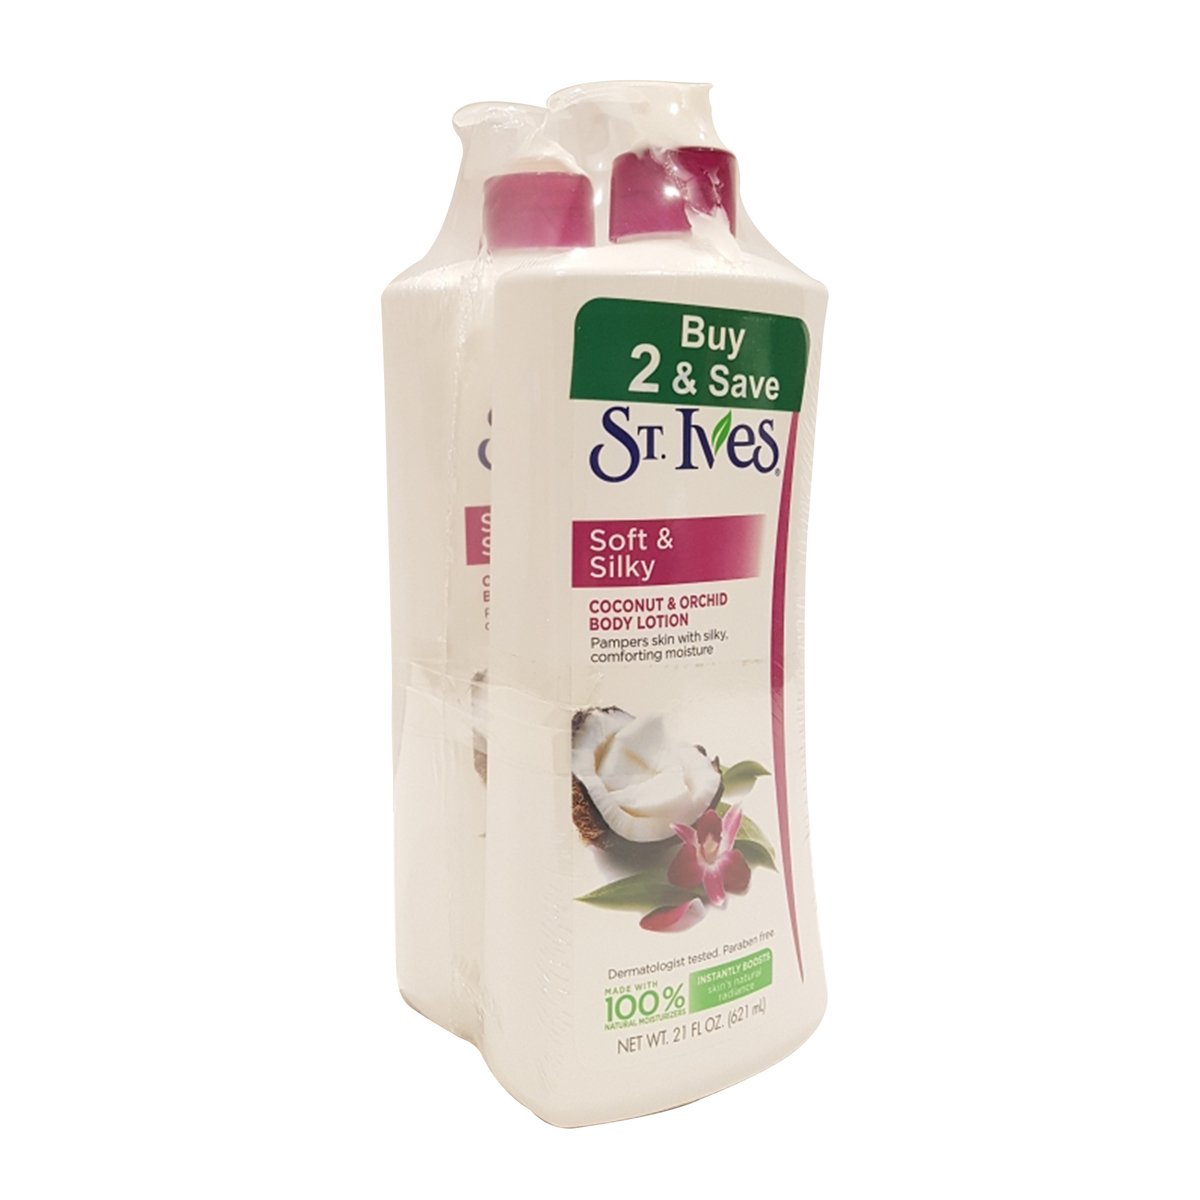 St.Ives Soft & Silky Coconut & Orchid Body Lotion 2 x 621ml